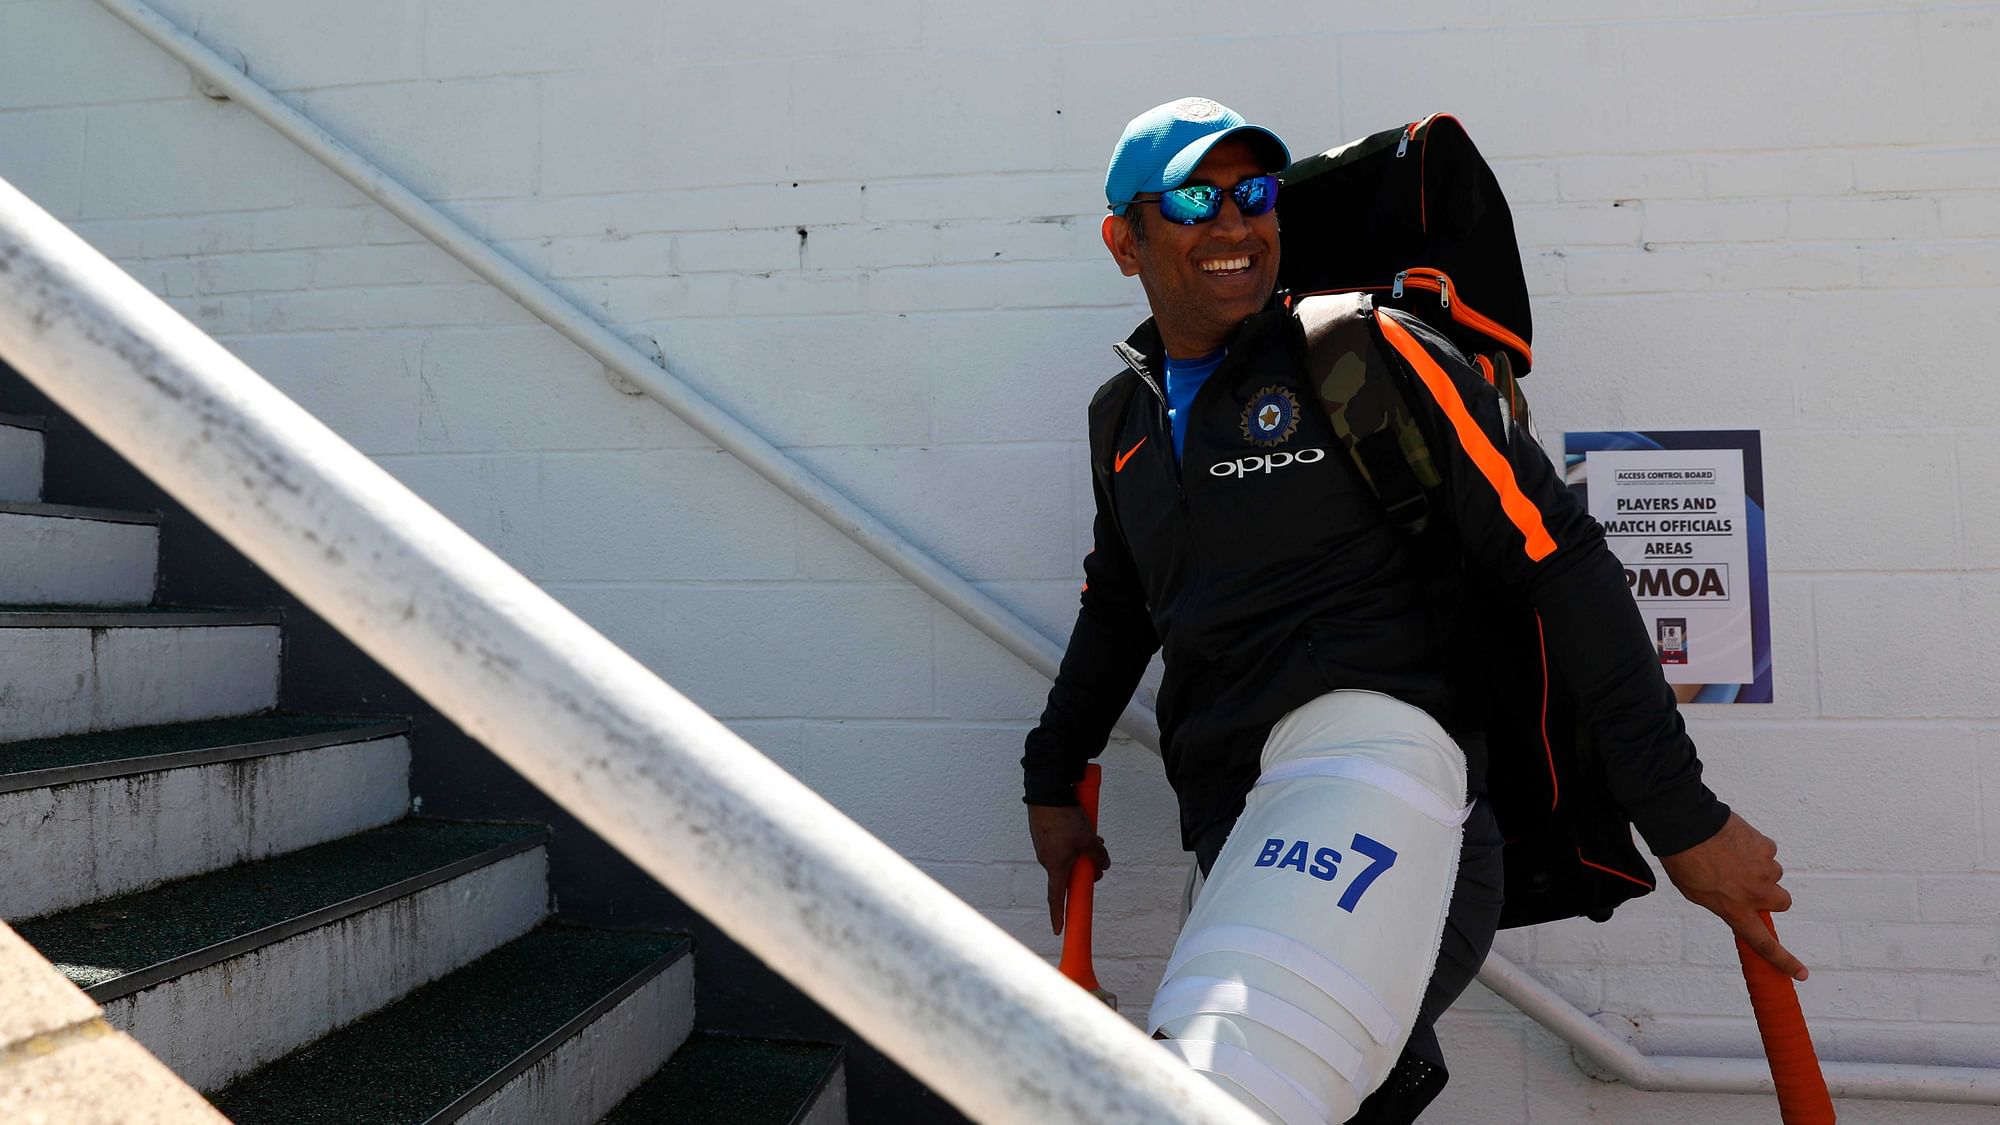 MS Dhoni does not play Test cricket for India and joined the team in Sri Lanka earlier this week